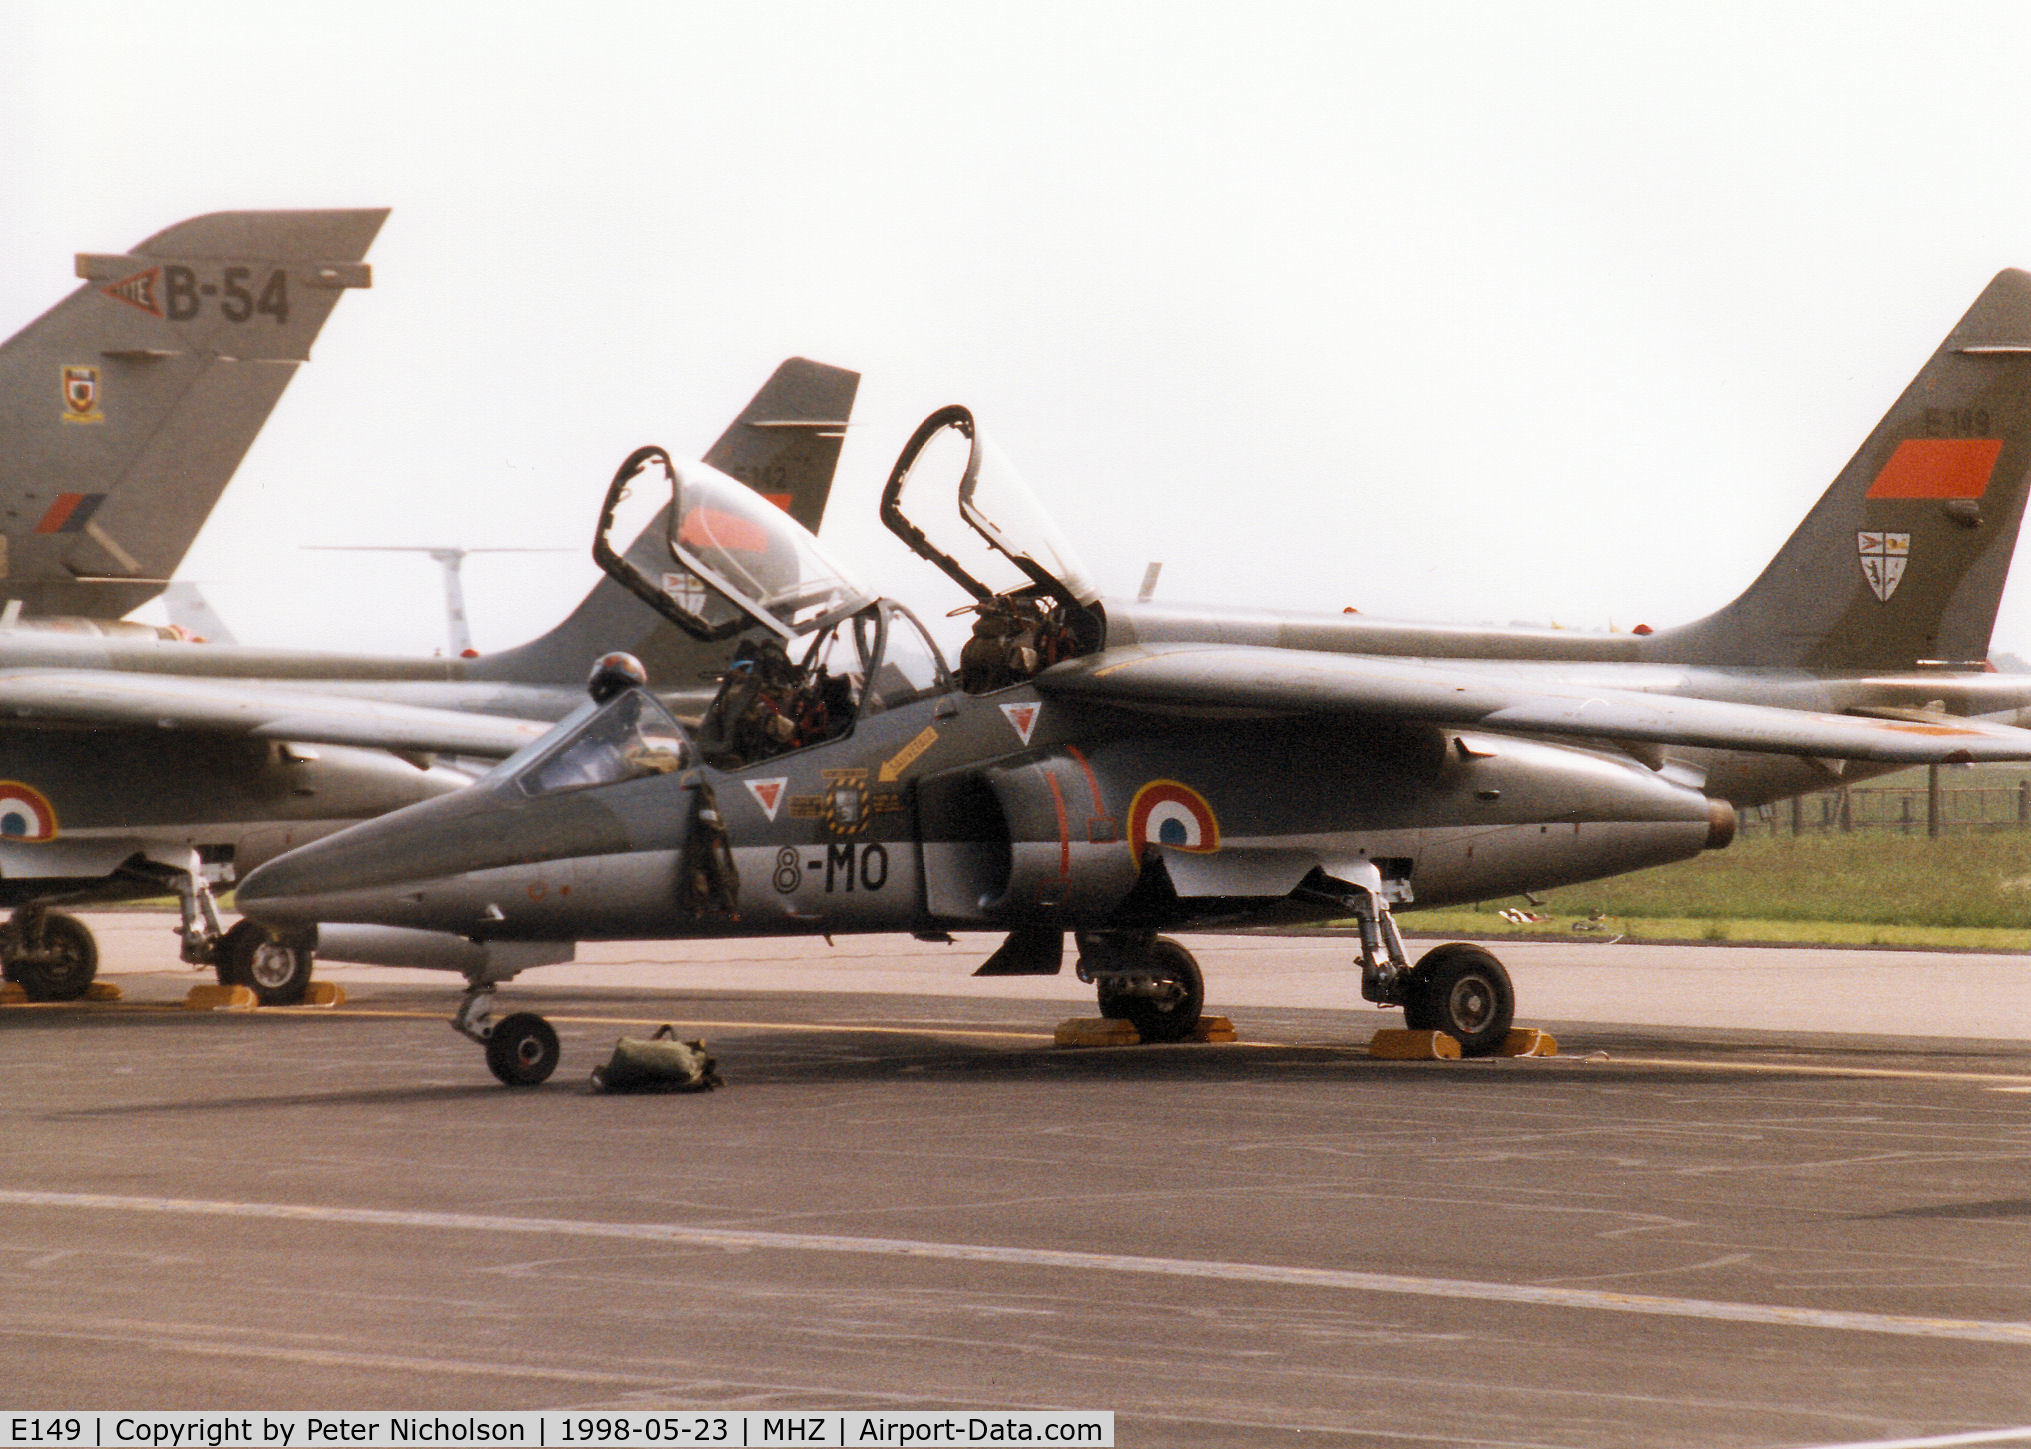 E149, Dassault-Dornier Alpha Jet E C/N E149, French Air Force Alpha Jet from ETO. 01.008 at Cazaux on the flight-line at the 1998 RAF Mildenhall Air Fete.